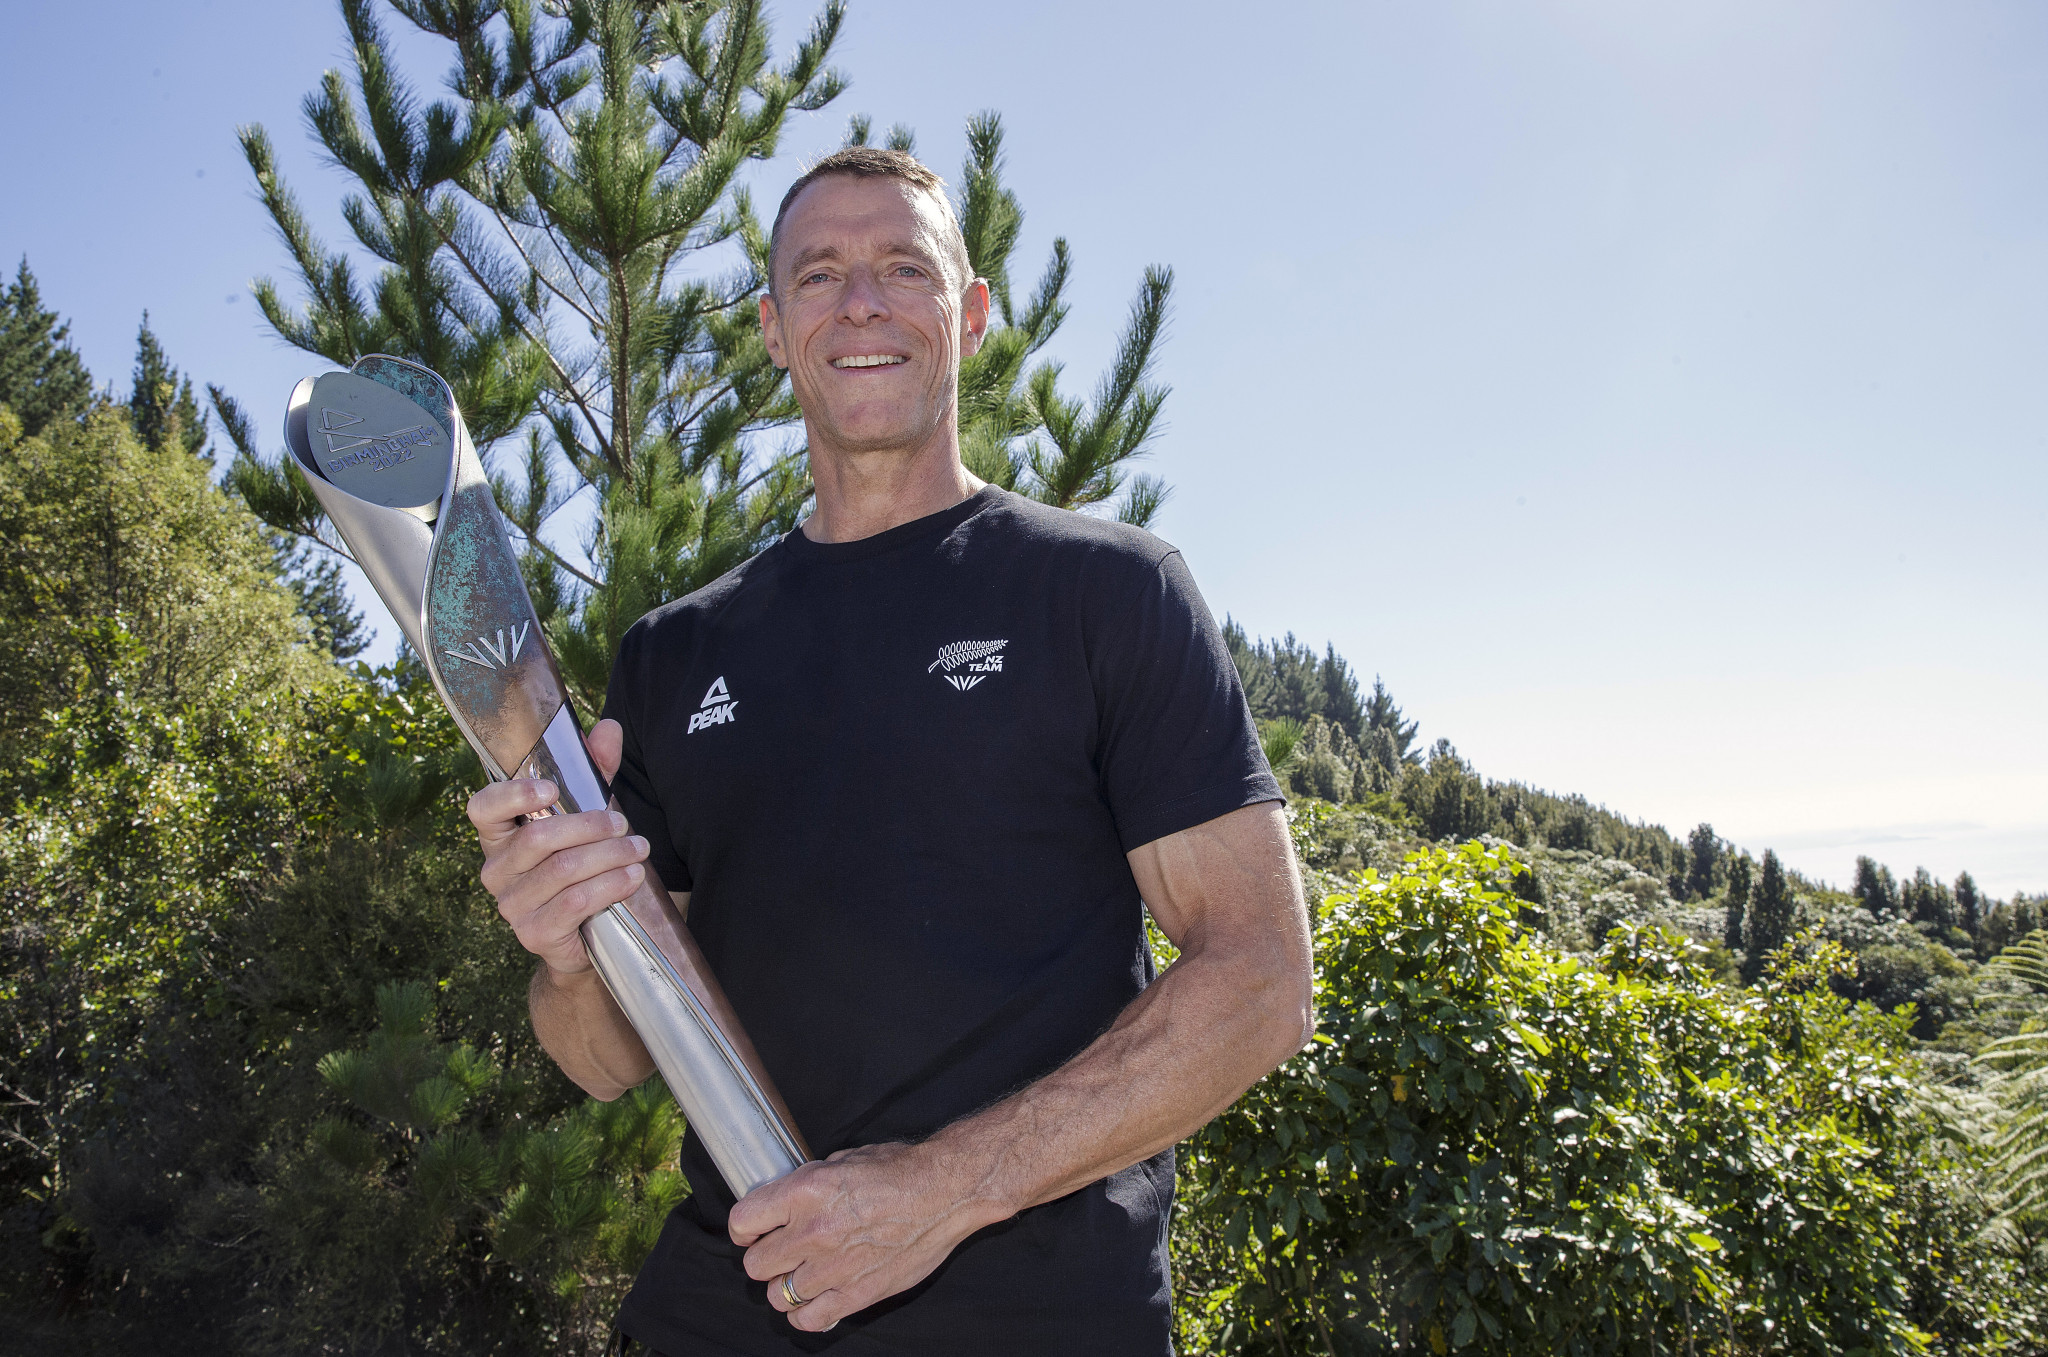 Nigel Avery has been appointed as New Zealand's Chef de Mission for Birmingham 2022 ©Getty Images